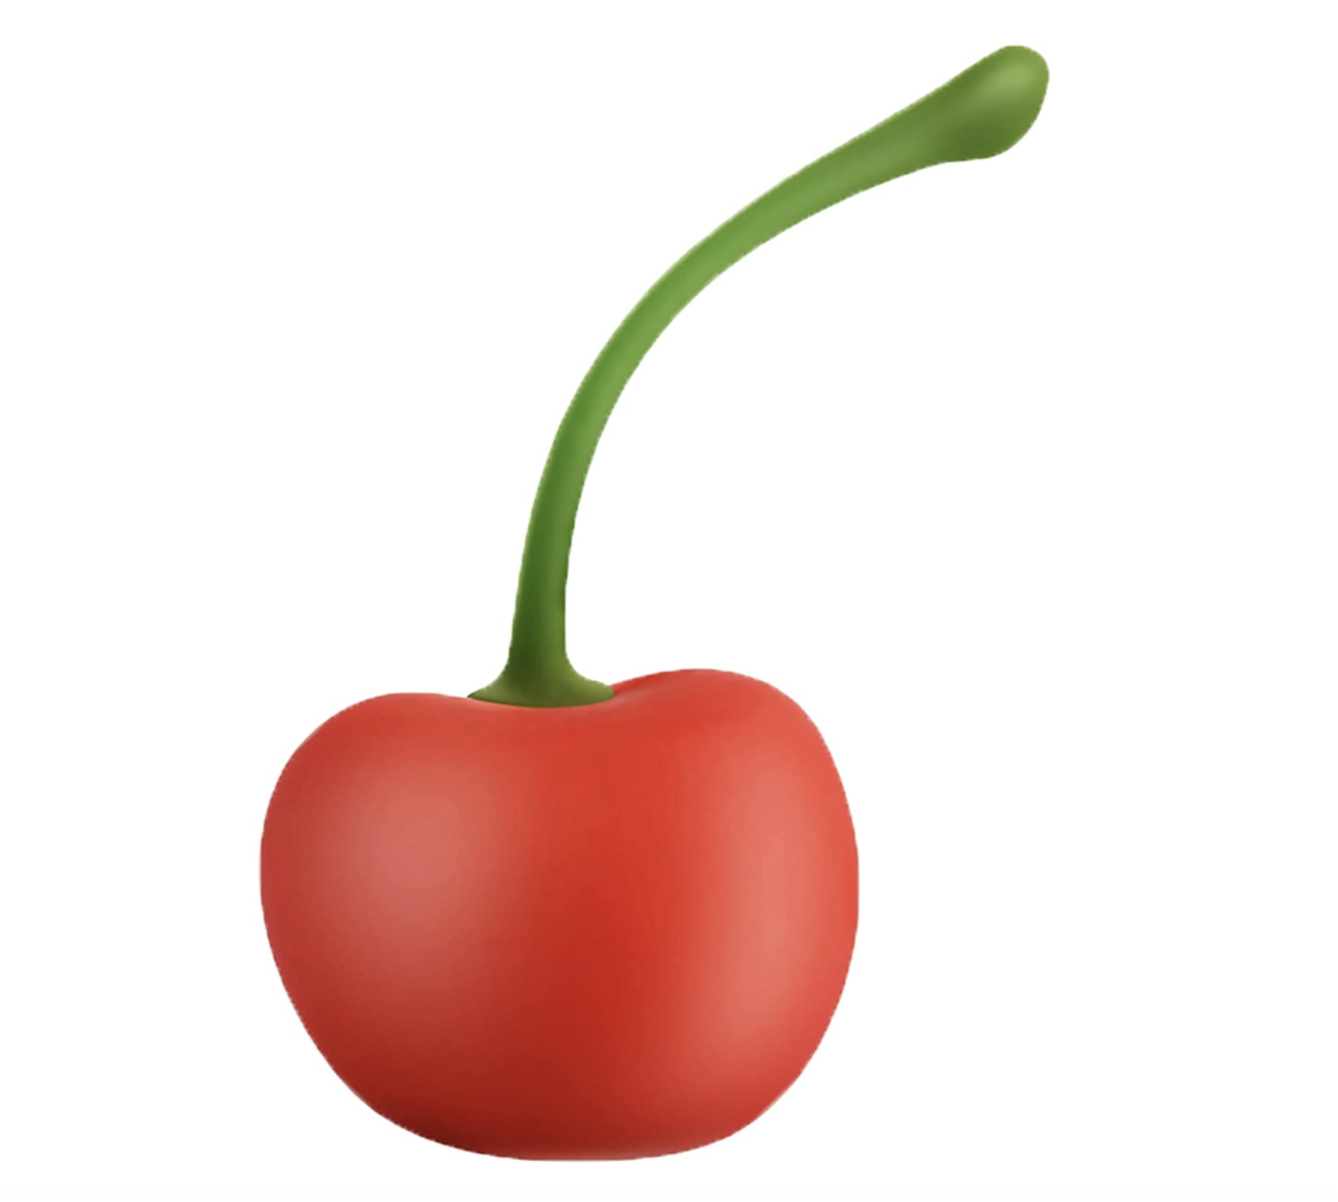 The cherry vibrator on a blank background